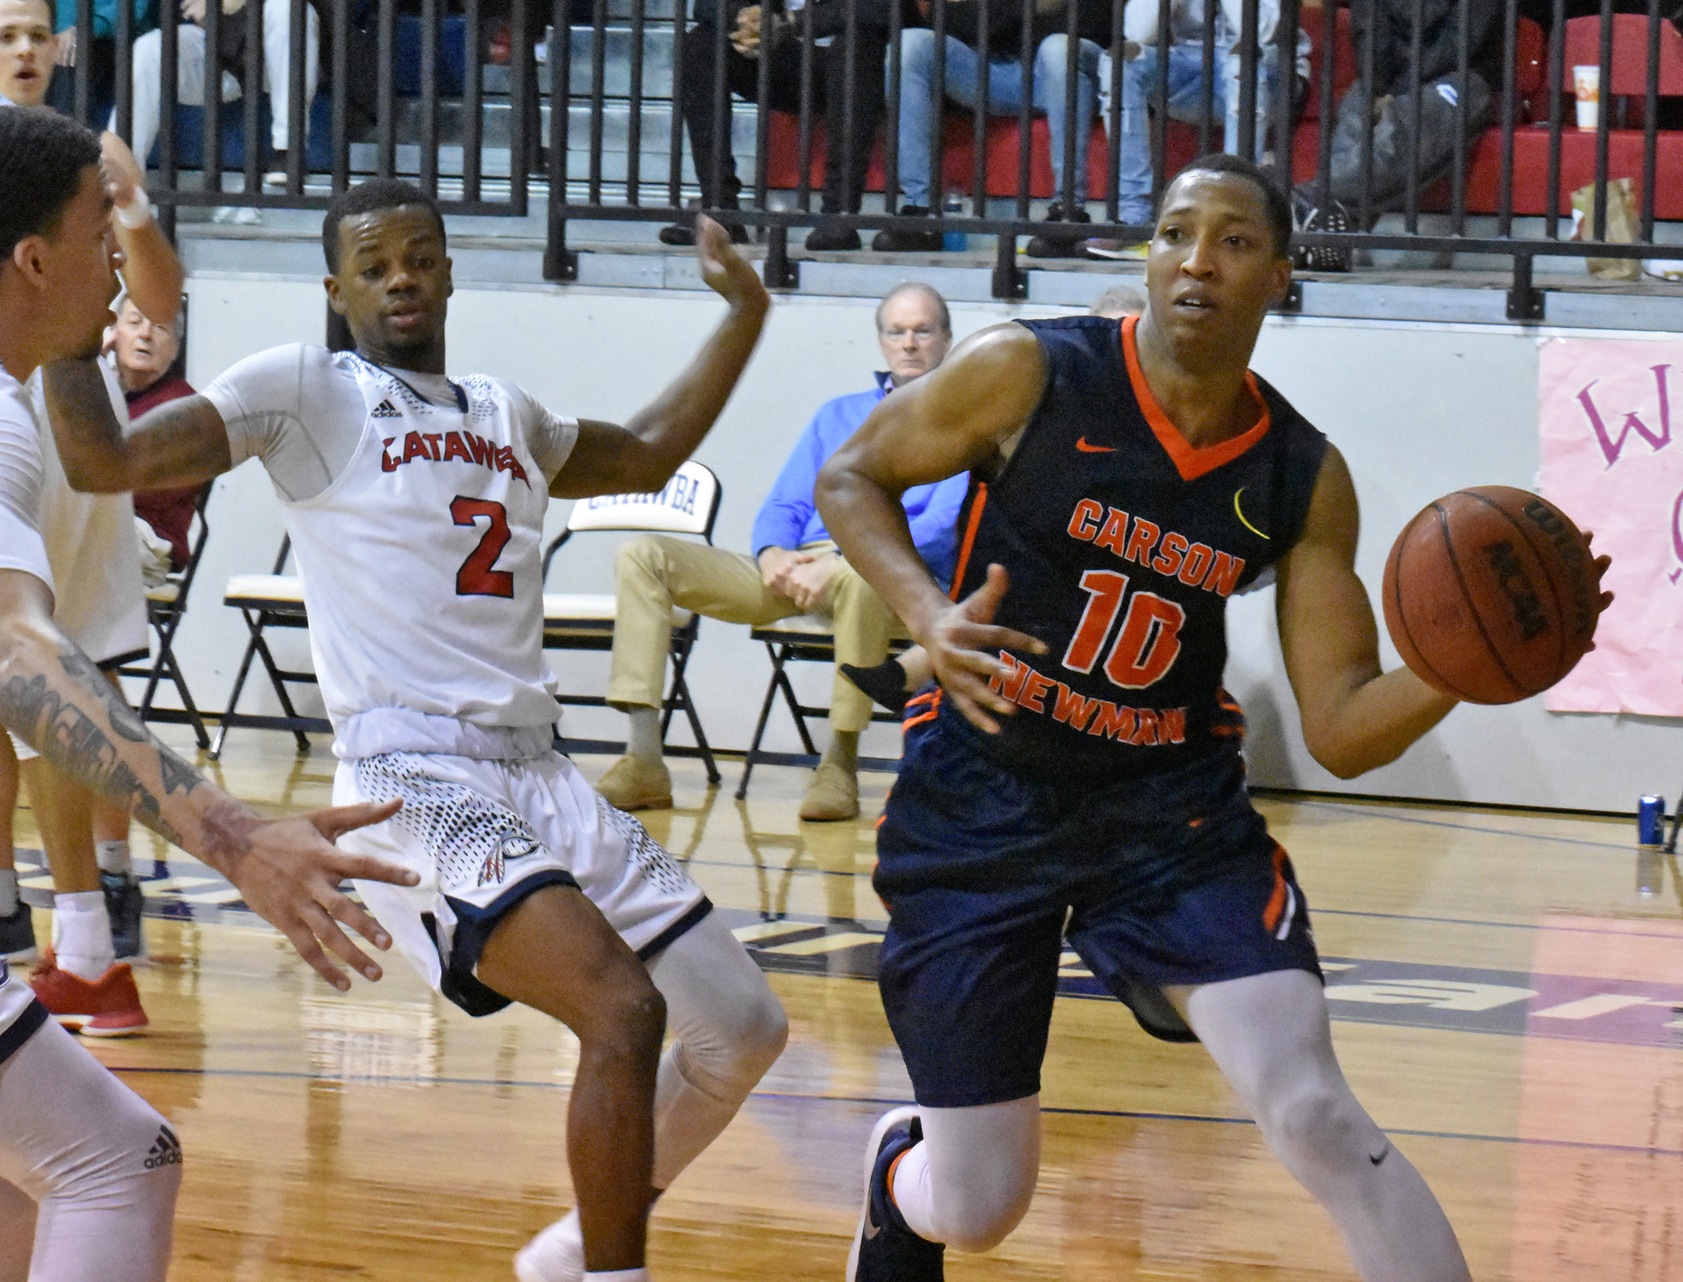 Staunch second half sends C-N soaring over Catawba 104-89